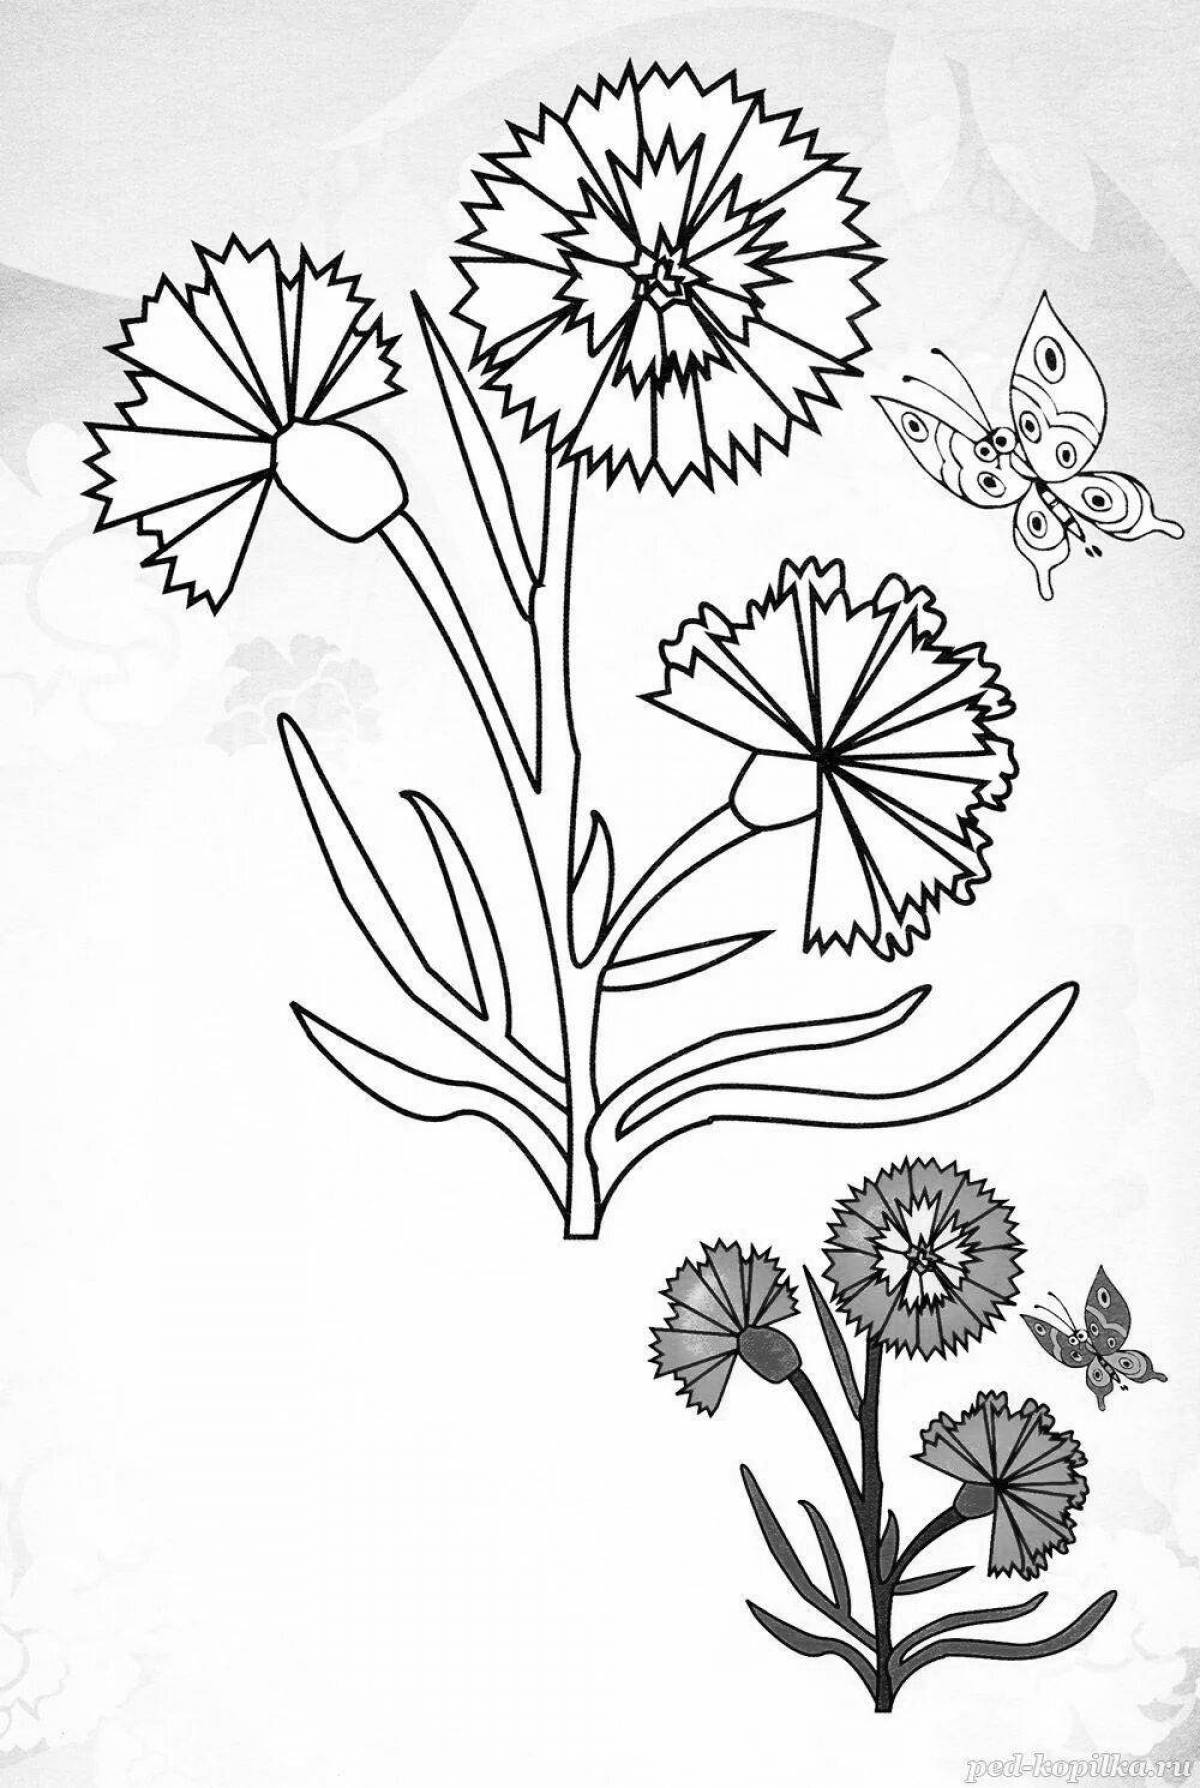 Sparkling cornflower coloring book for little ones